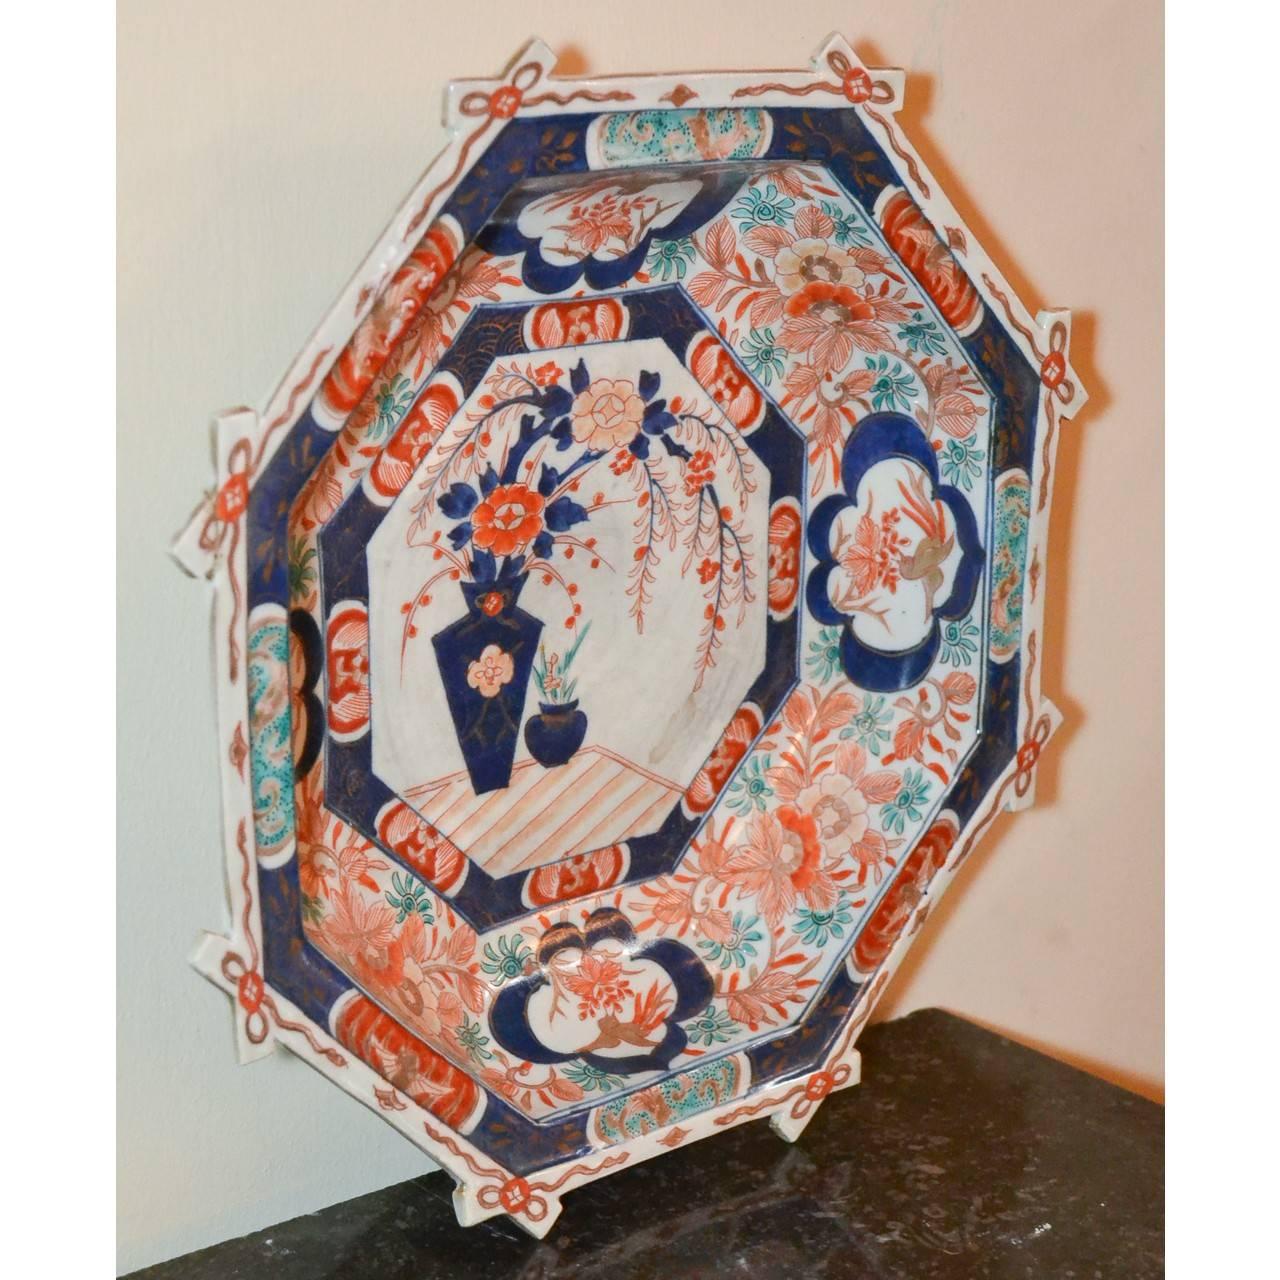 Just as beautiful on the bottom as it is on top! This rare octagon shaped Imari bowl was made in Japan, circa 1870. This porcelain bowl was beautifully painted with enamel in jewel tone colors of lapis, coral and jade.
Measures: 13.5 inches wide x